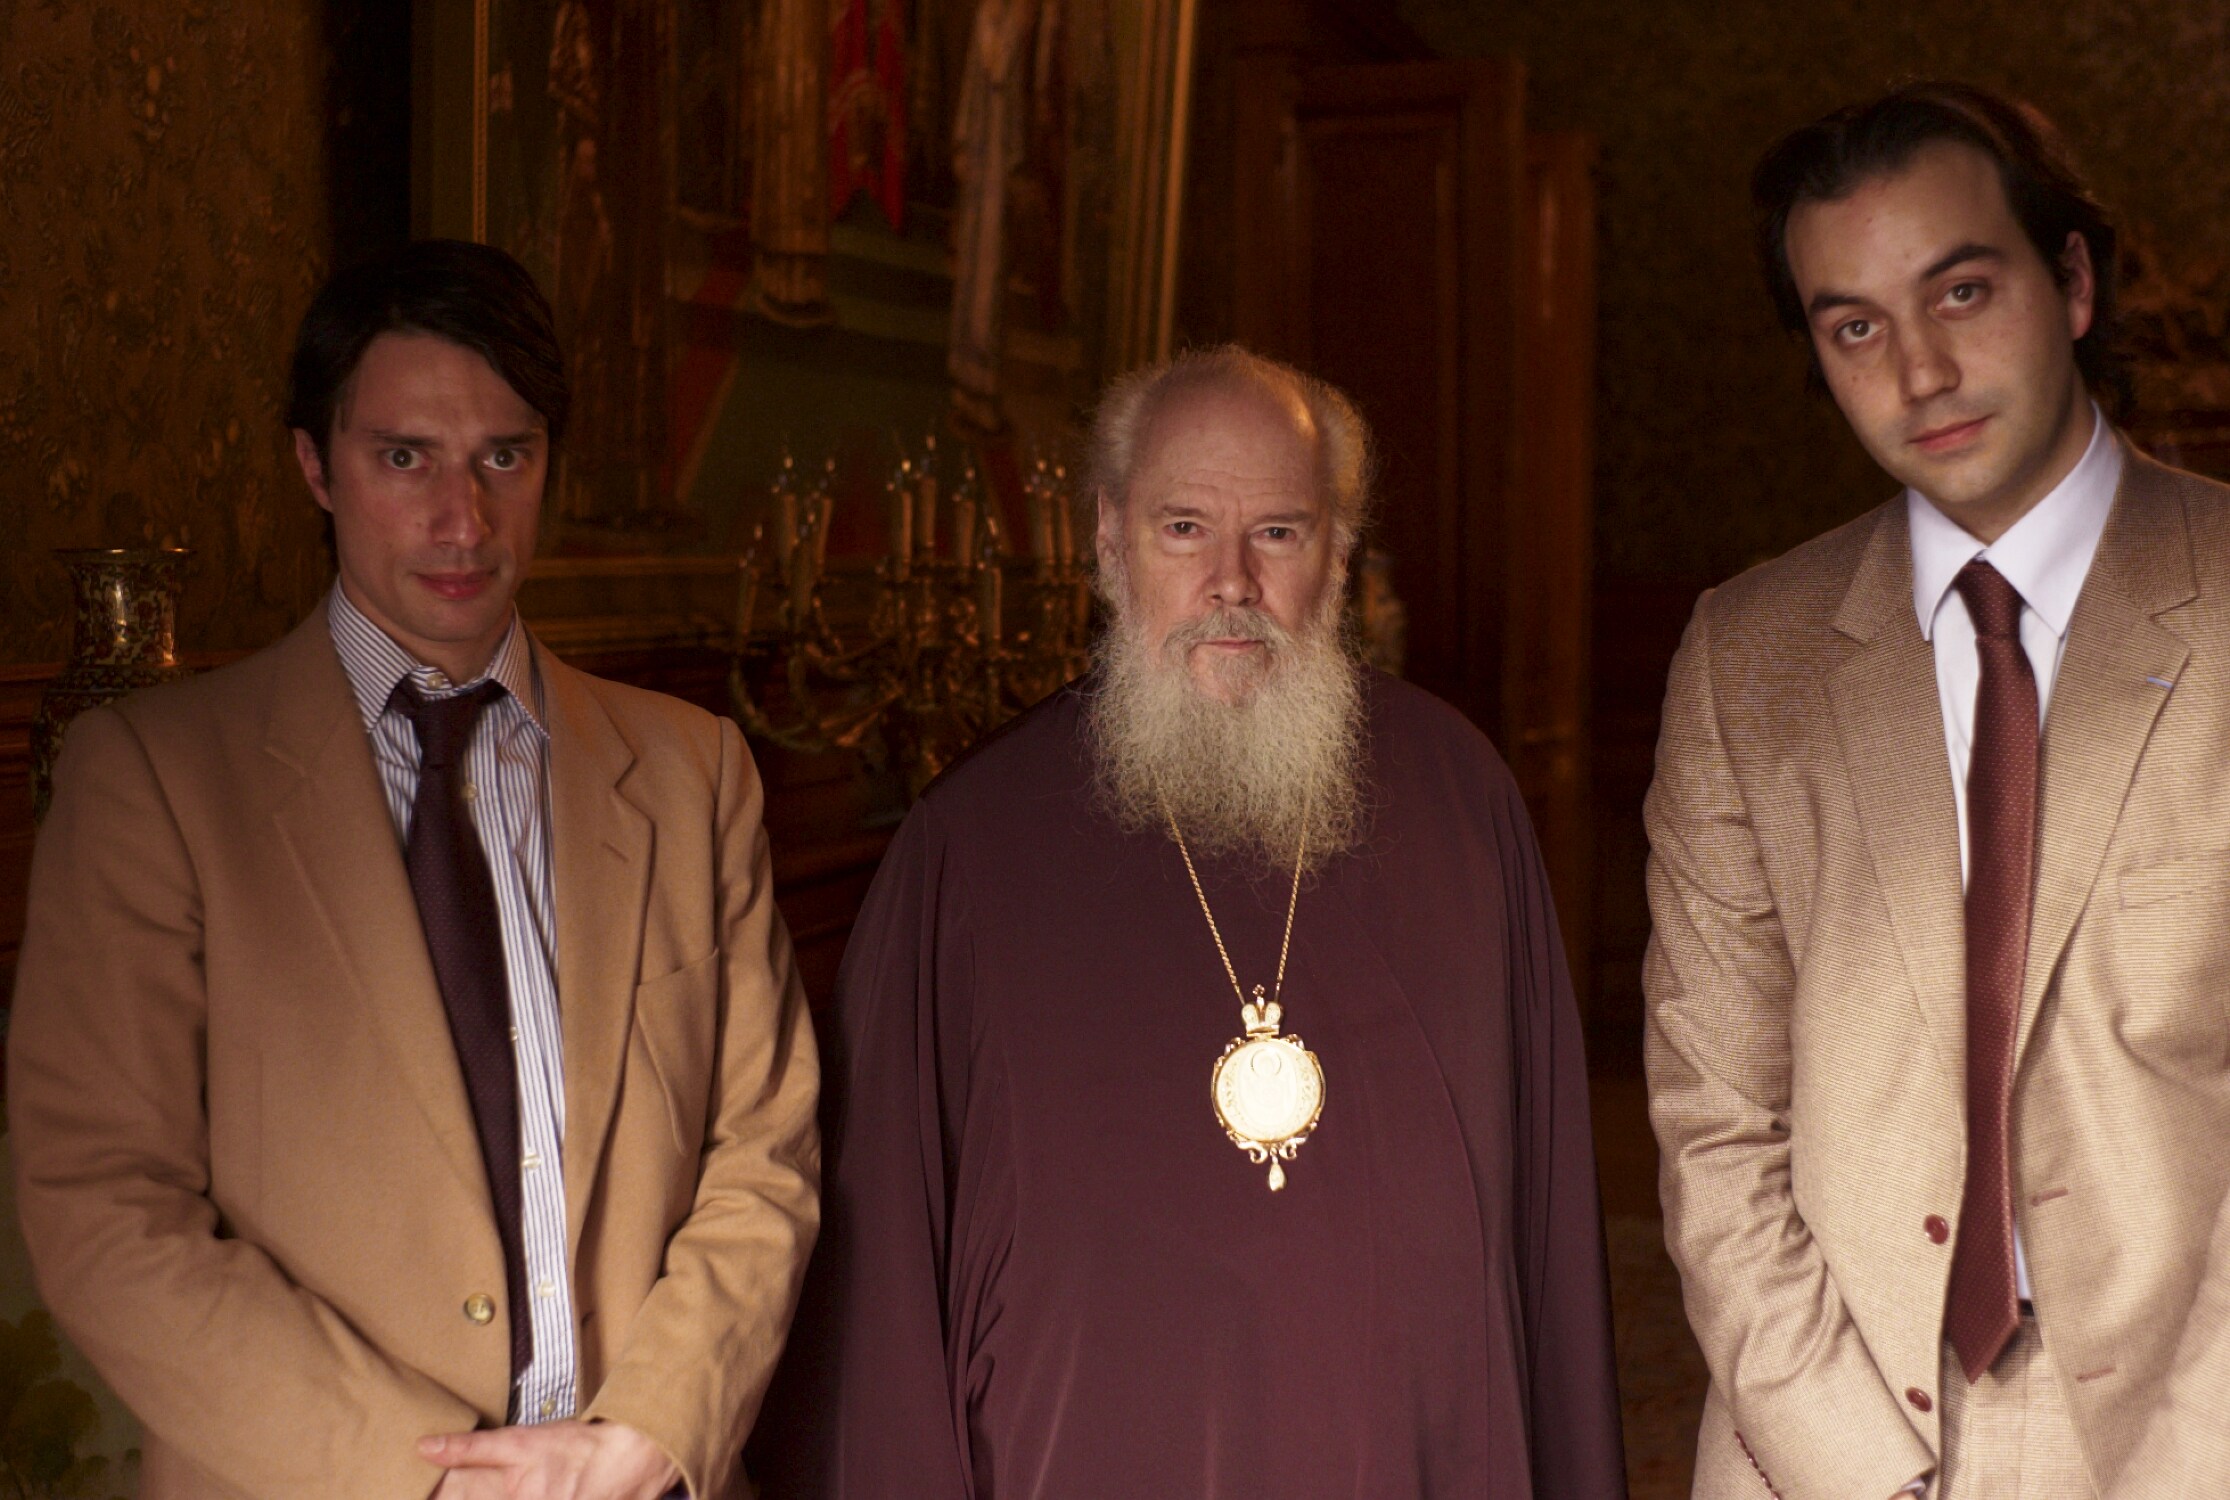 Jules Naudet, Gedeon Naudet and Alexei II, Patriarch of Moscow and head of the Russian Orthodox Church. Moscow, Russia, 2008